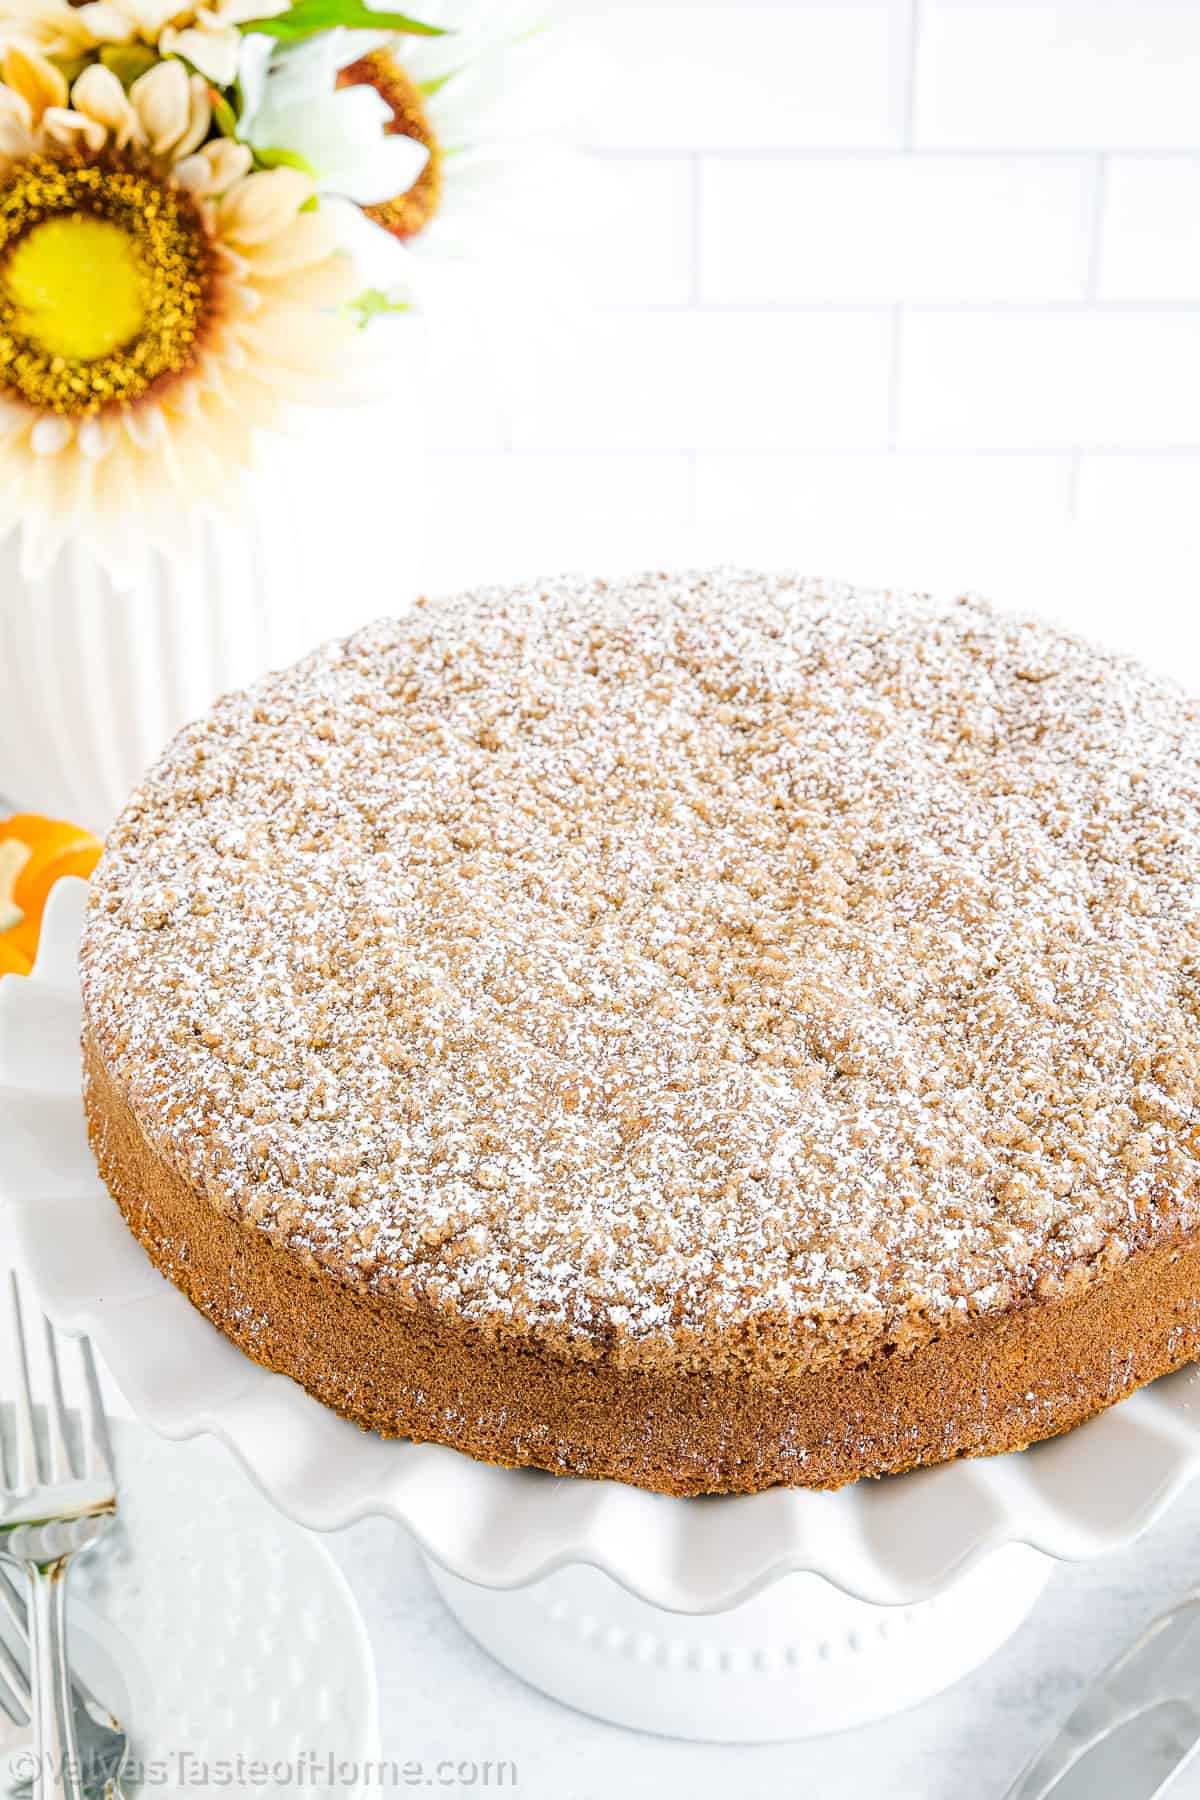 Pumpkin coffee cake combines the traditional coffee cake with some pumpkin pie filling and pumpkin pie spice.